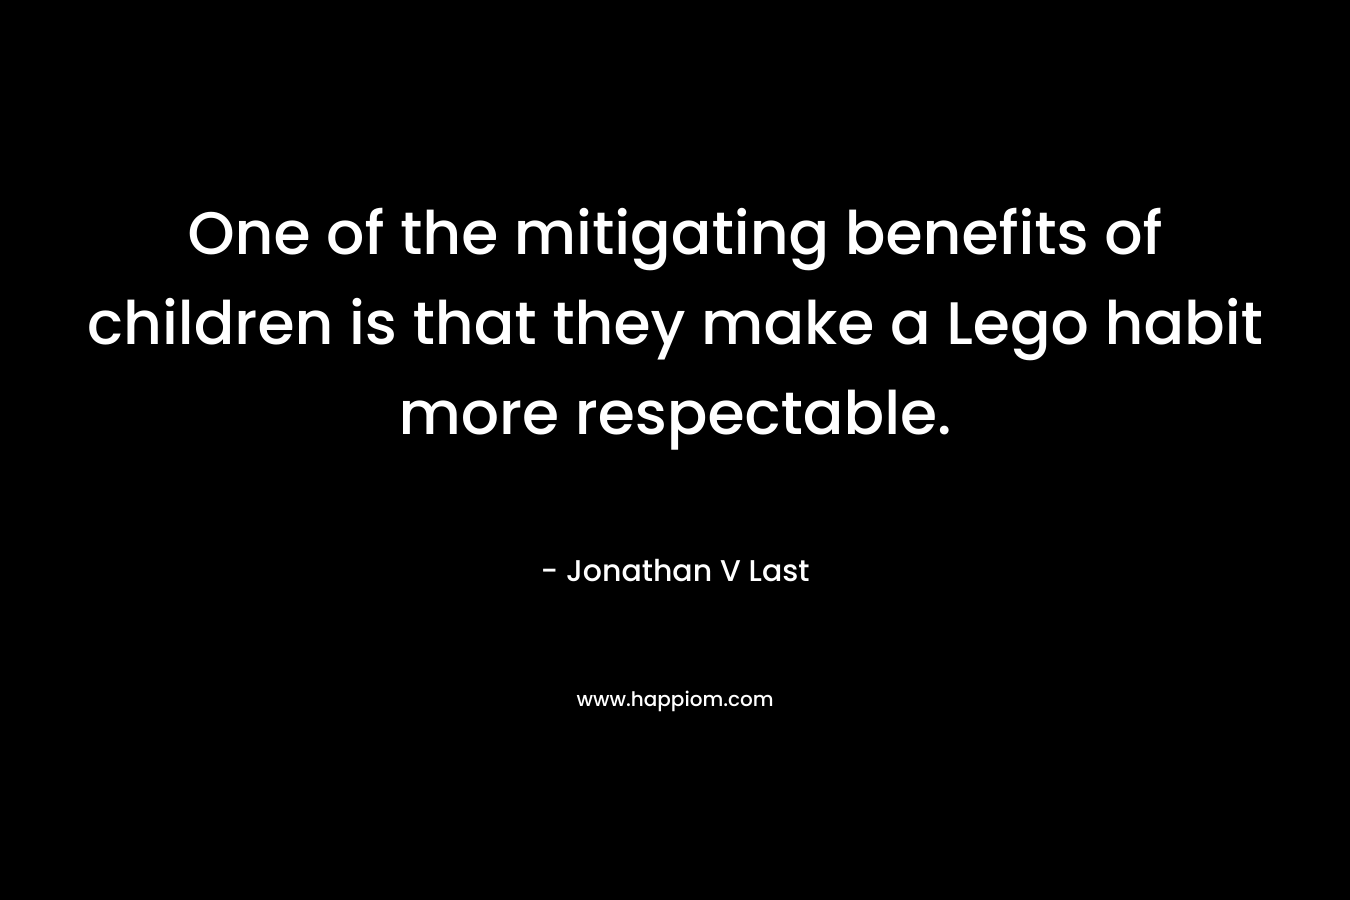 One of the mitigating benefits of children is that they make a Lego habit more respectable. – Jonathan V Last